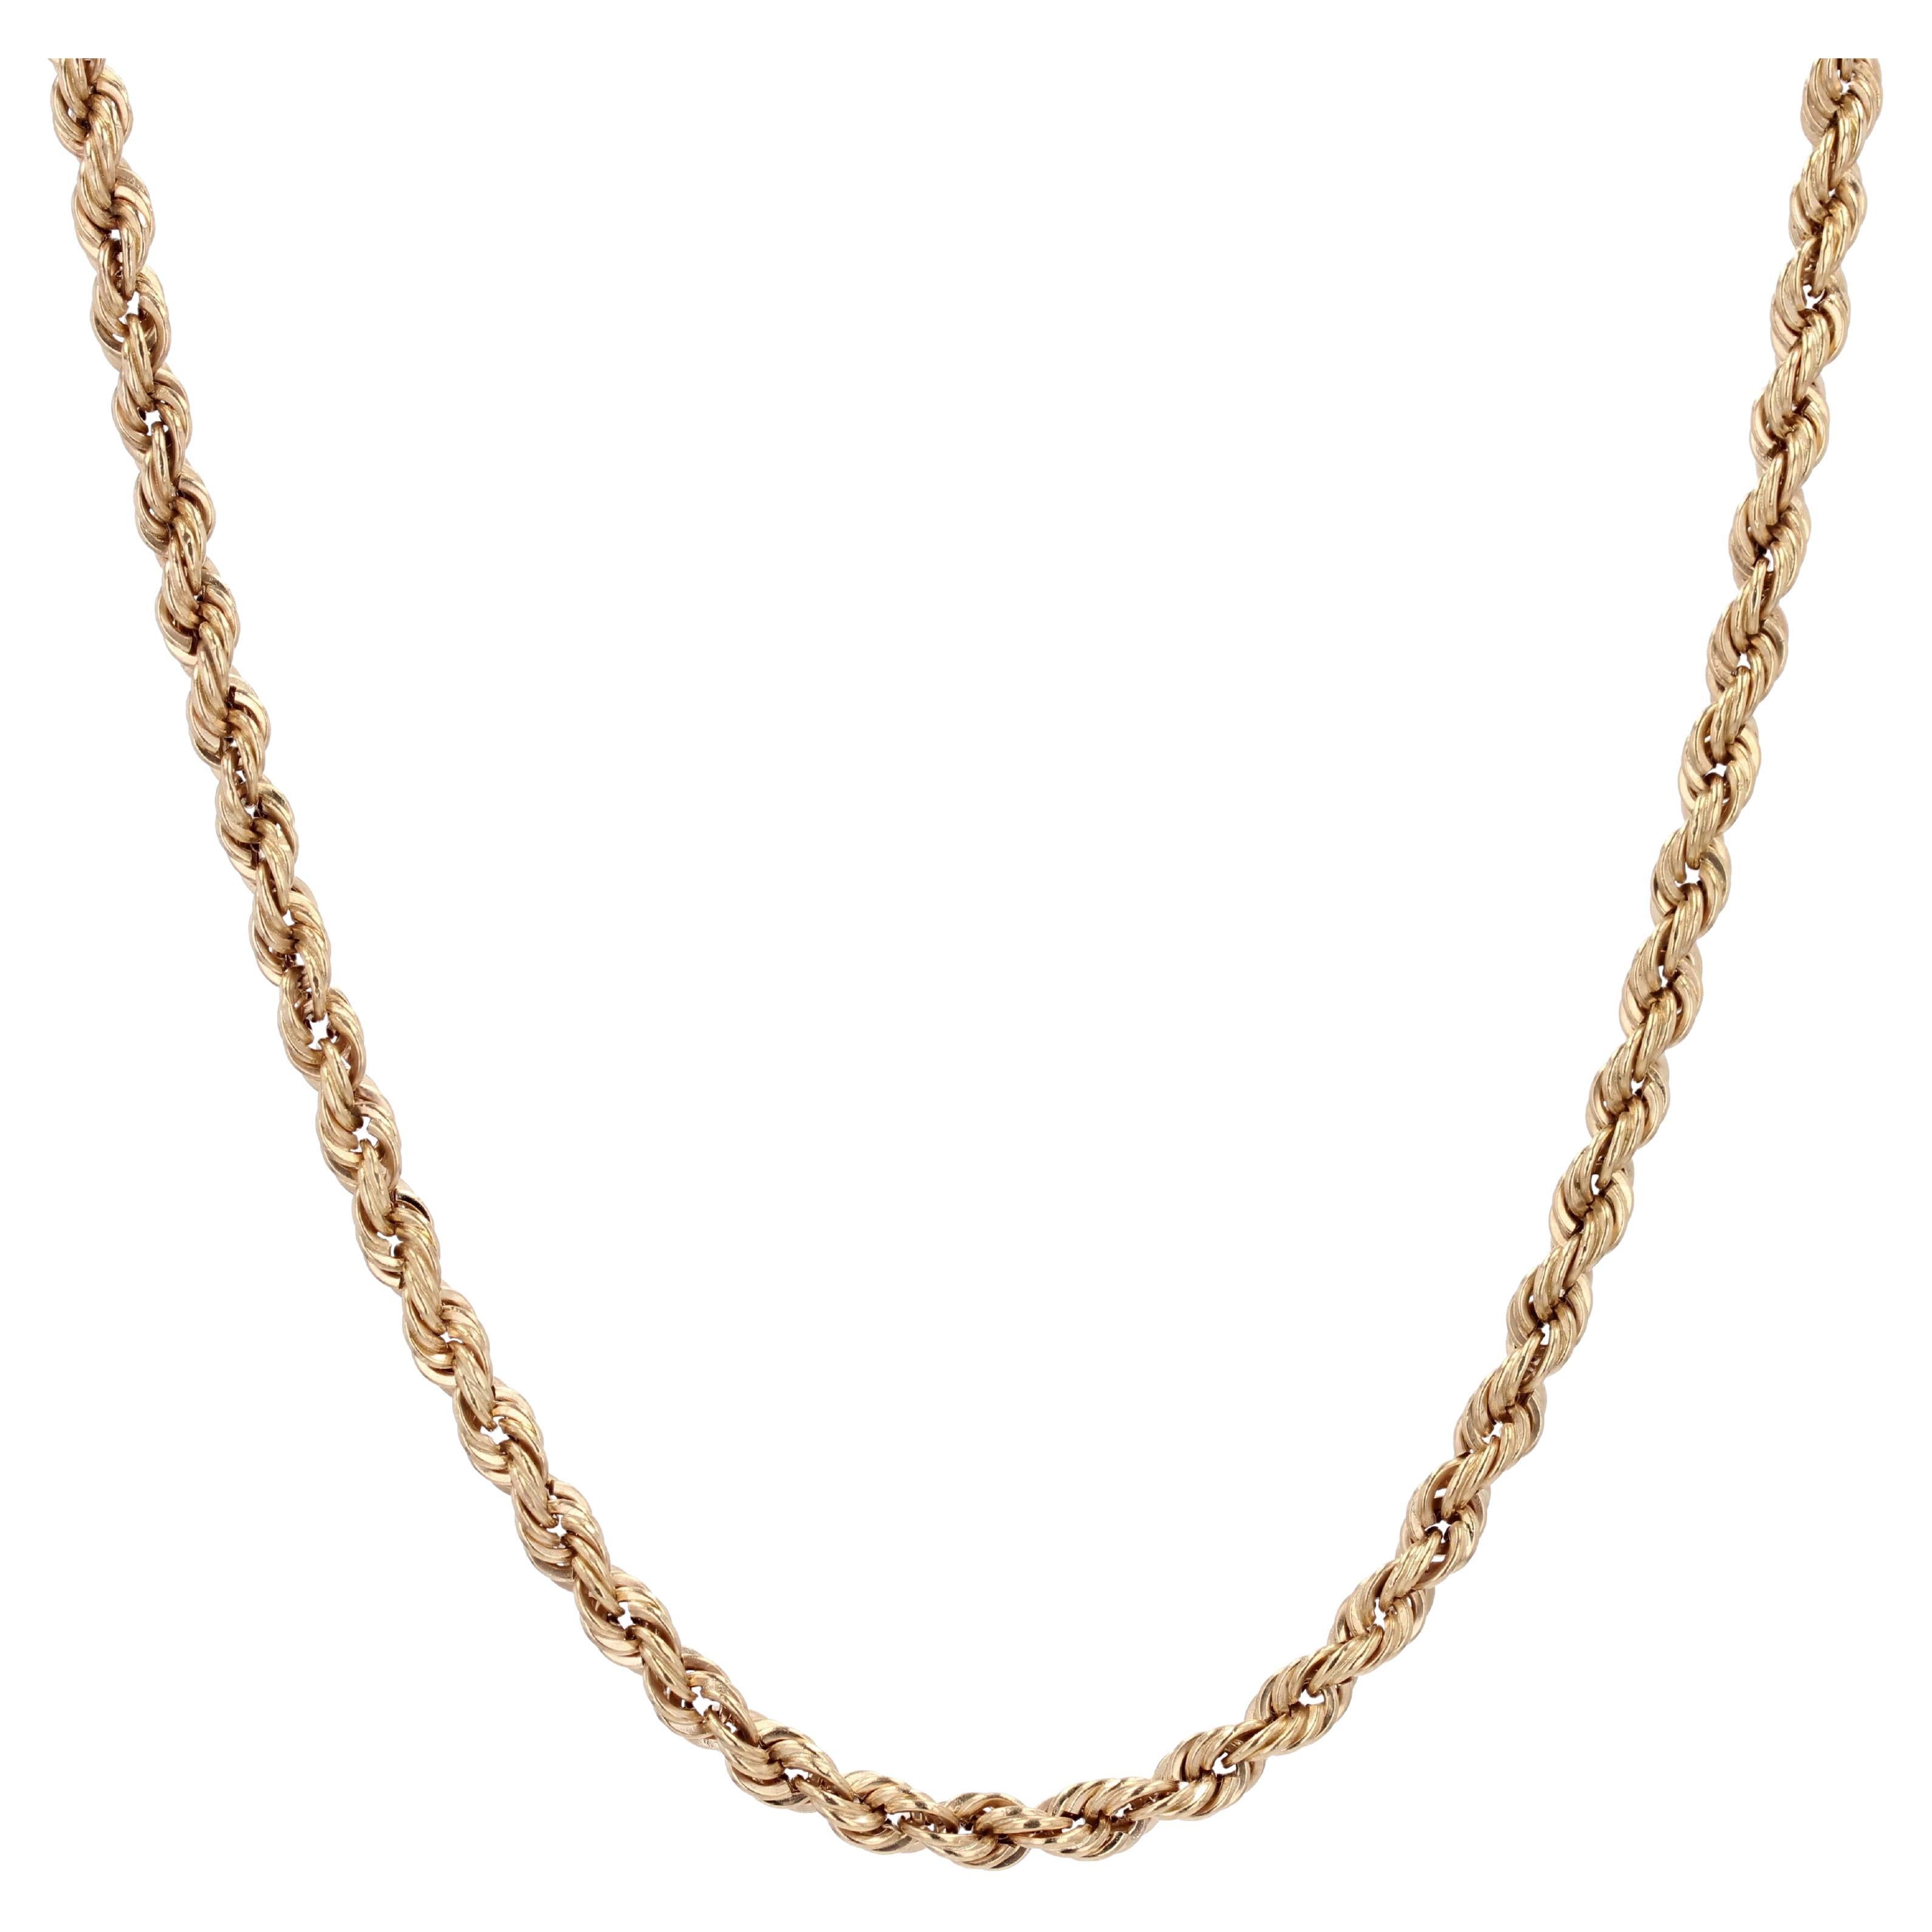 1960s 18 Karat Yellow Gold Retro Twisted Chain Long Necklace